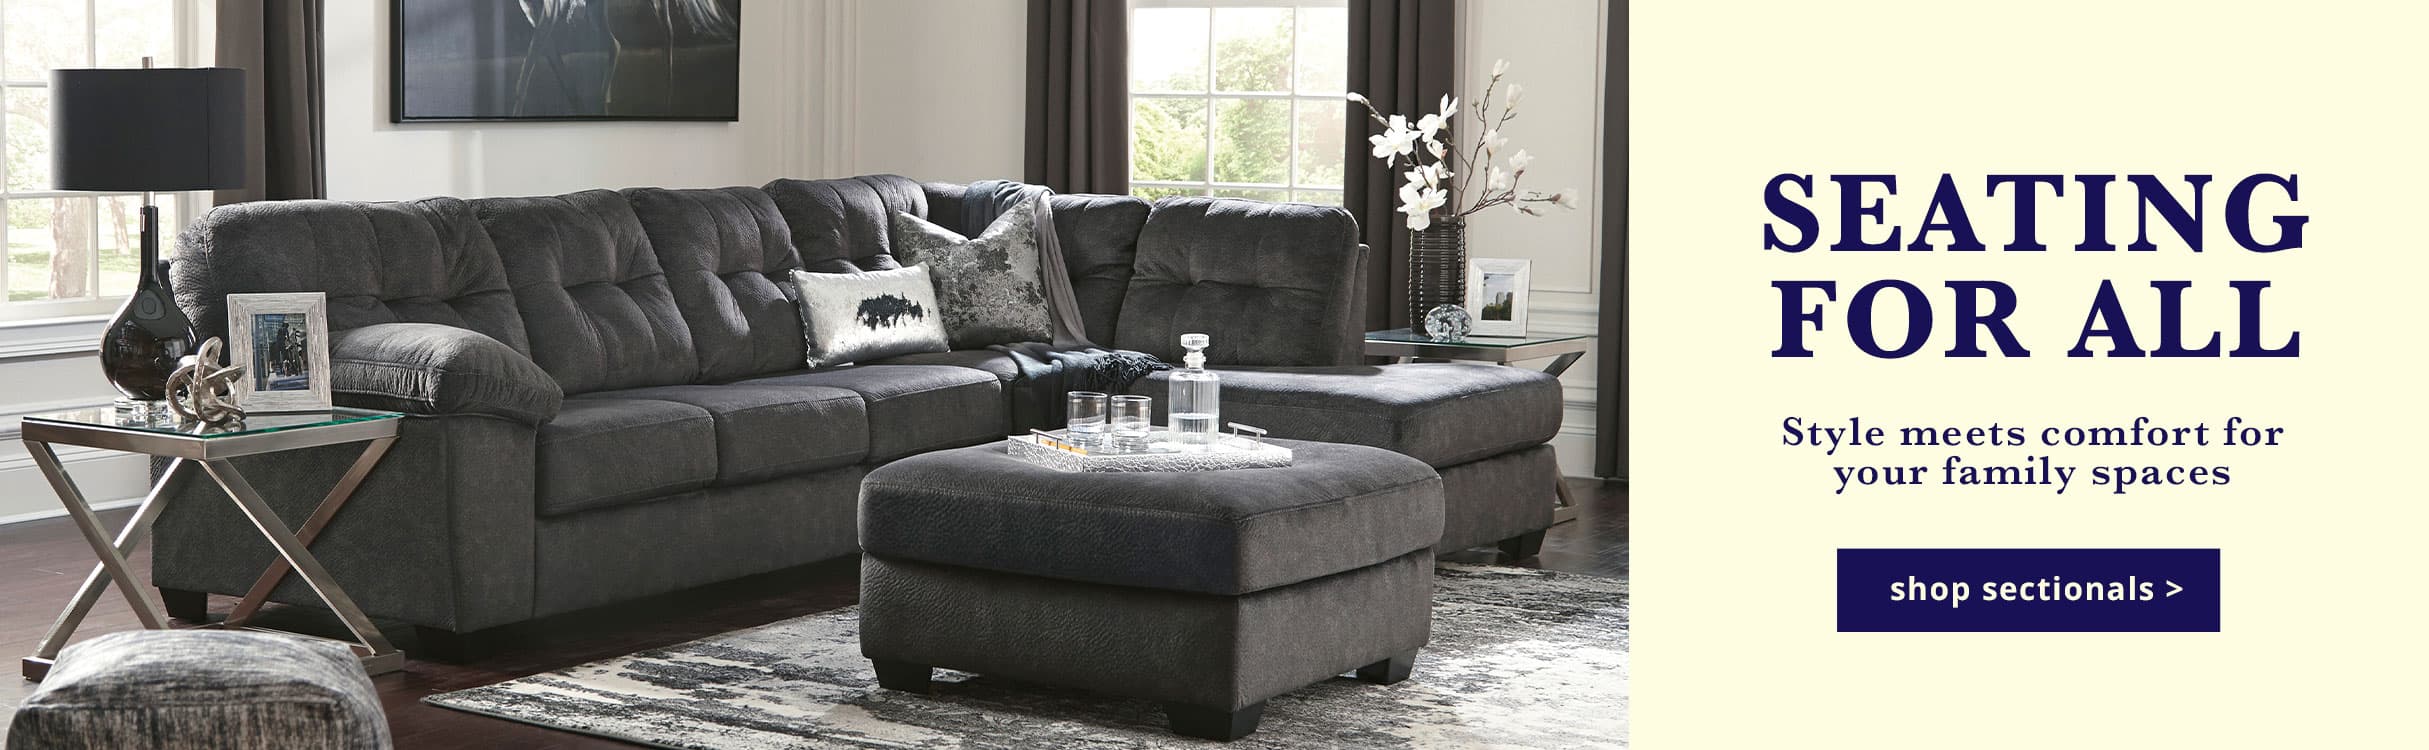 Seating for all Style meets comfort for your family spaces